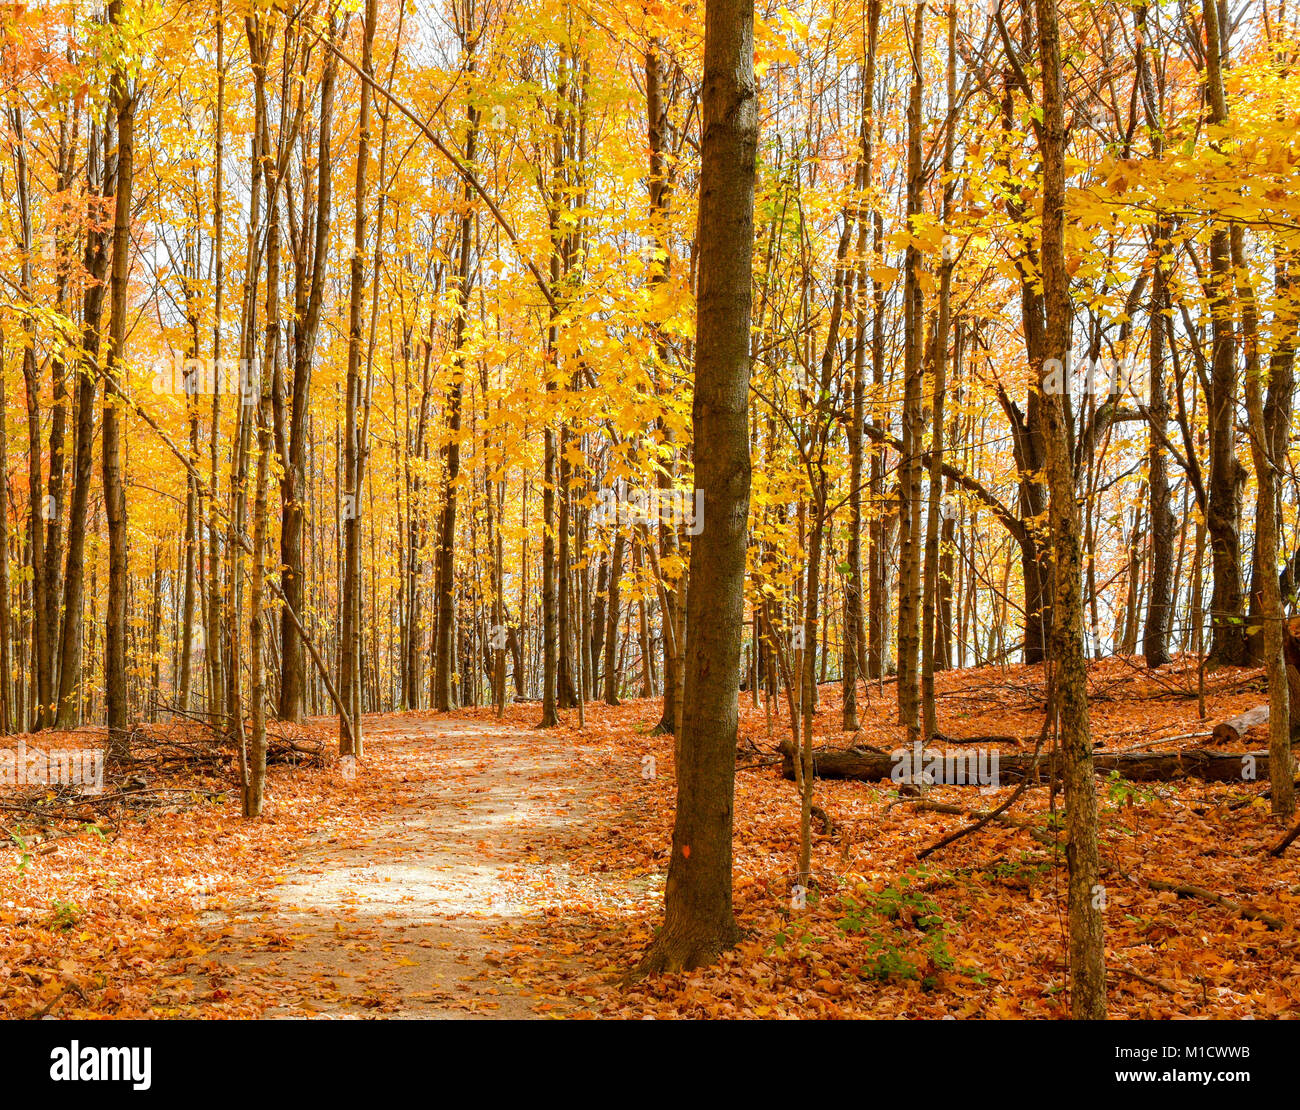 A walking trail through the woods during the peak of fall color. A blanket of leaves surround the trail. Golden leaves cling to the tall trees. Stock Photo